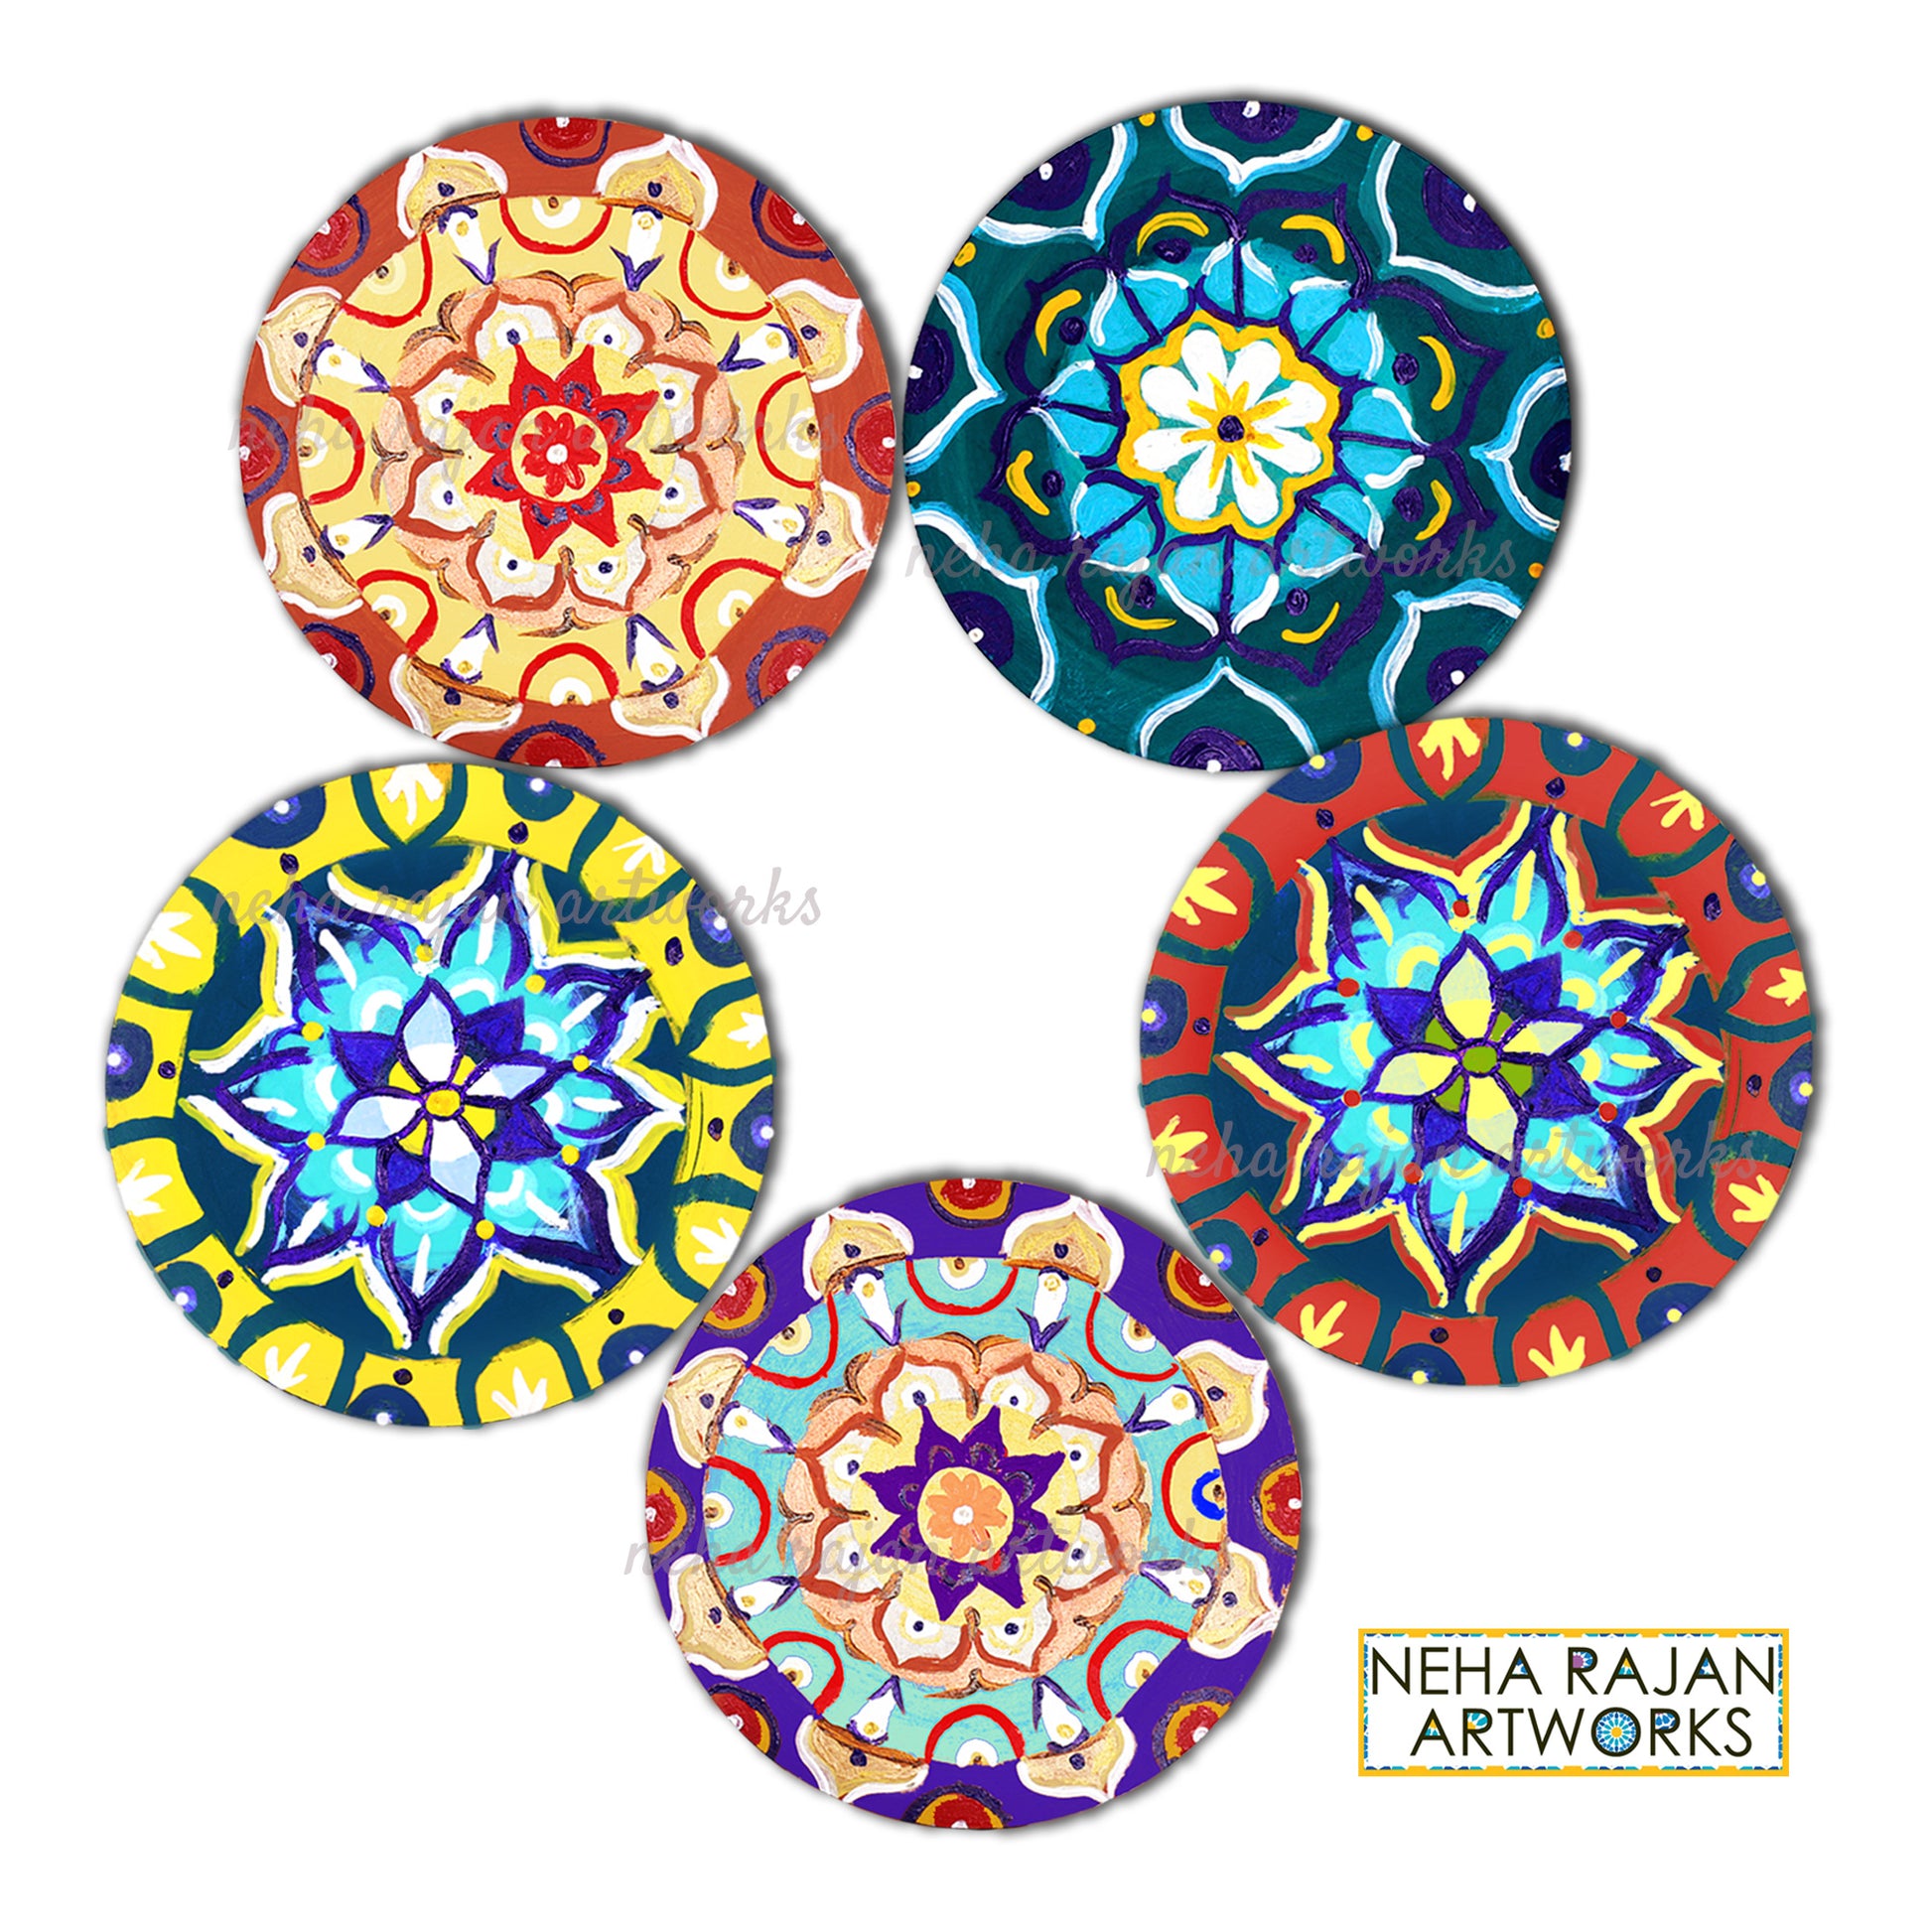 Neha Rajan Artworks Original Wooden Round Coffee/ Tea Coasters Set- Handcrafted & Hand-Painted Floral Mandala Coaster with Easel for Kitchen/Table & Home Decor/Gifts/Restaurants/Living Room/Coffee Table (Set of 2)